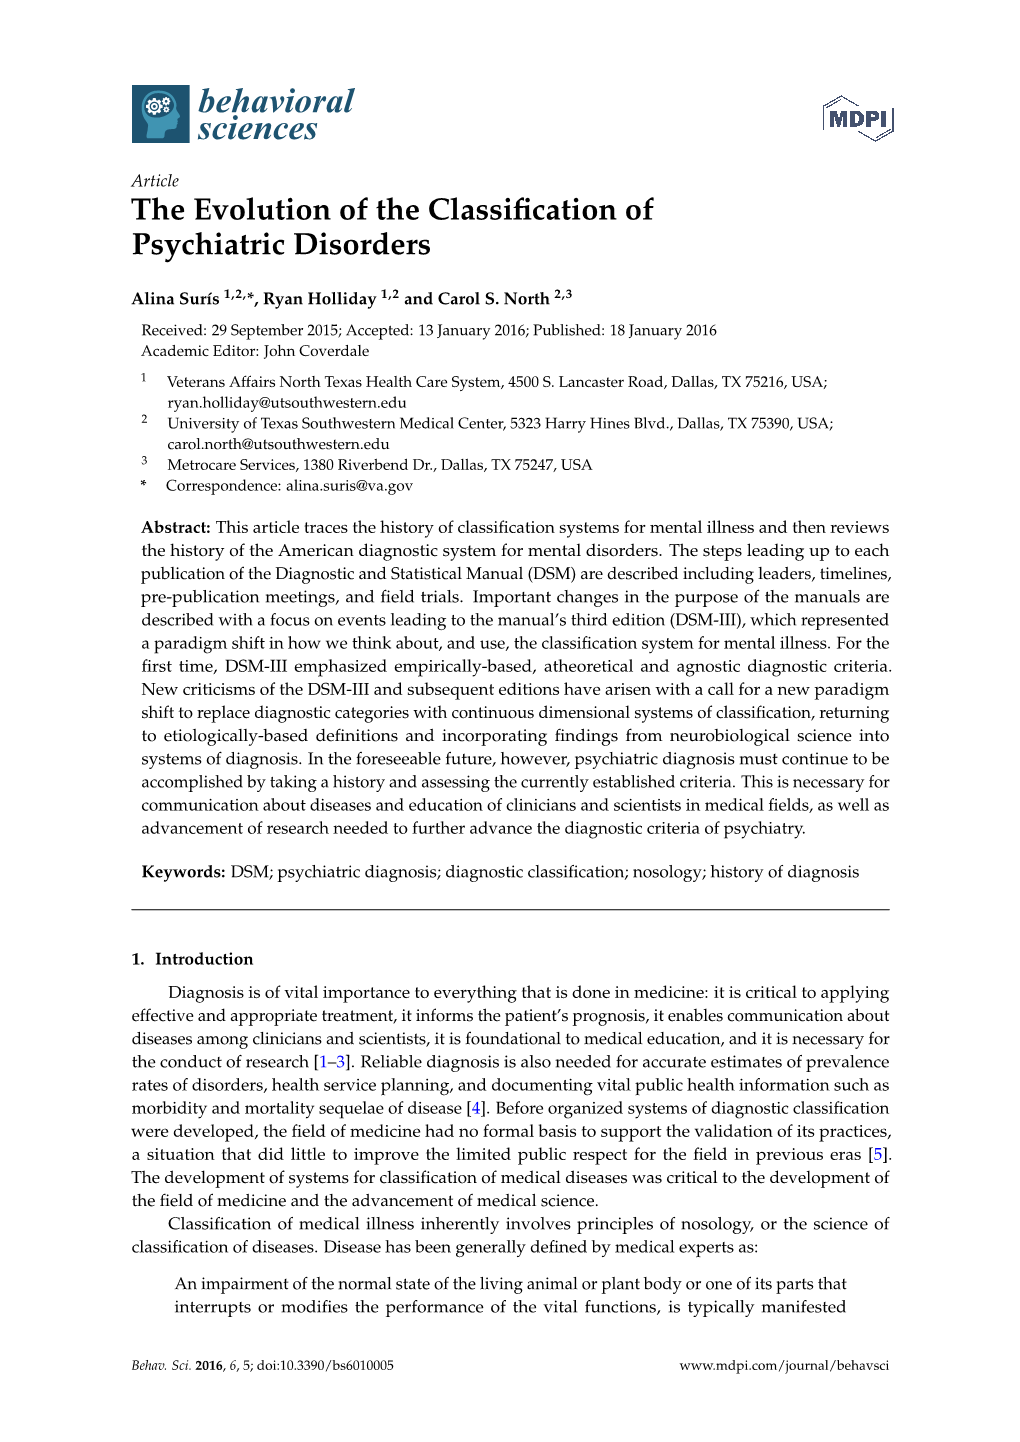 The Evolution of the Classification of Psychiatric Disorders